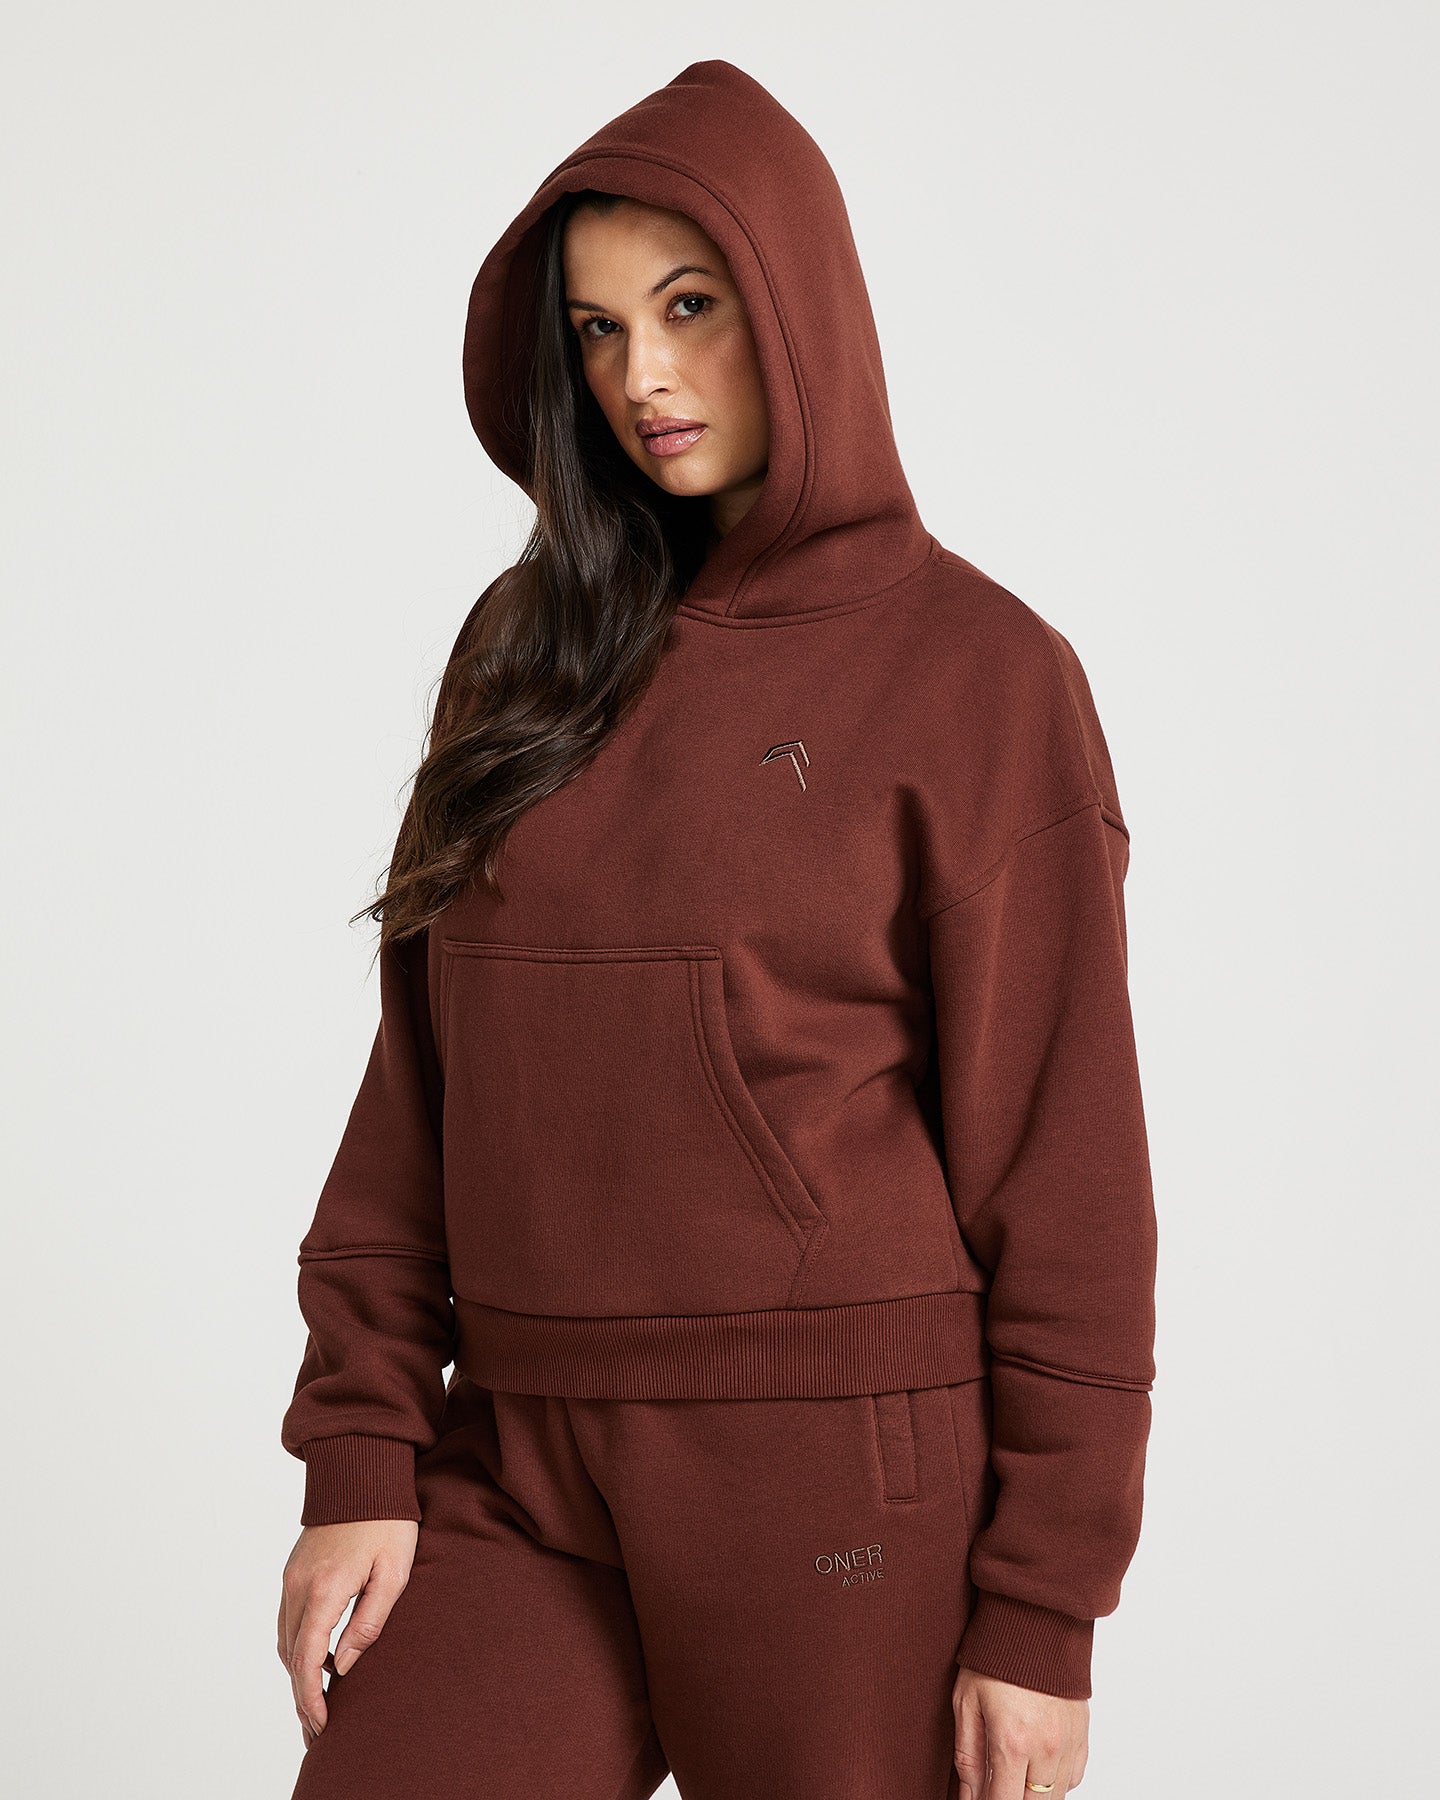 | for Active Oner Hoodie Sports WOMEN US